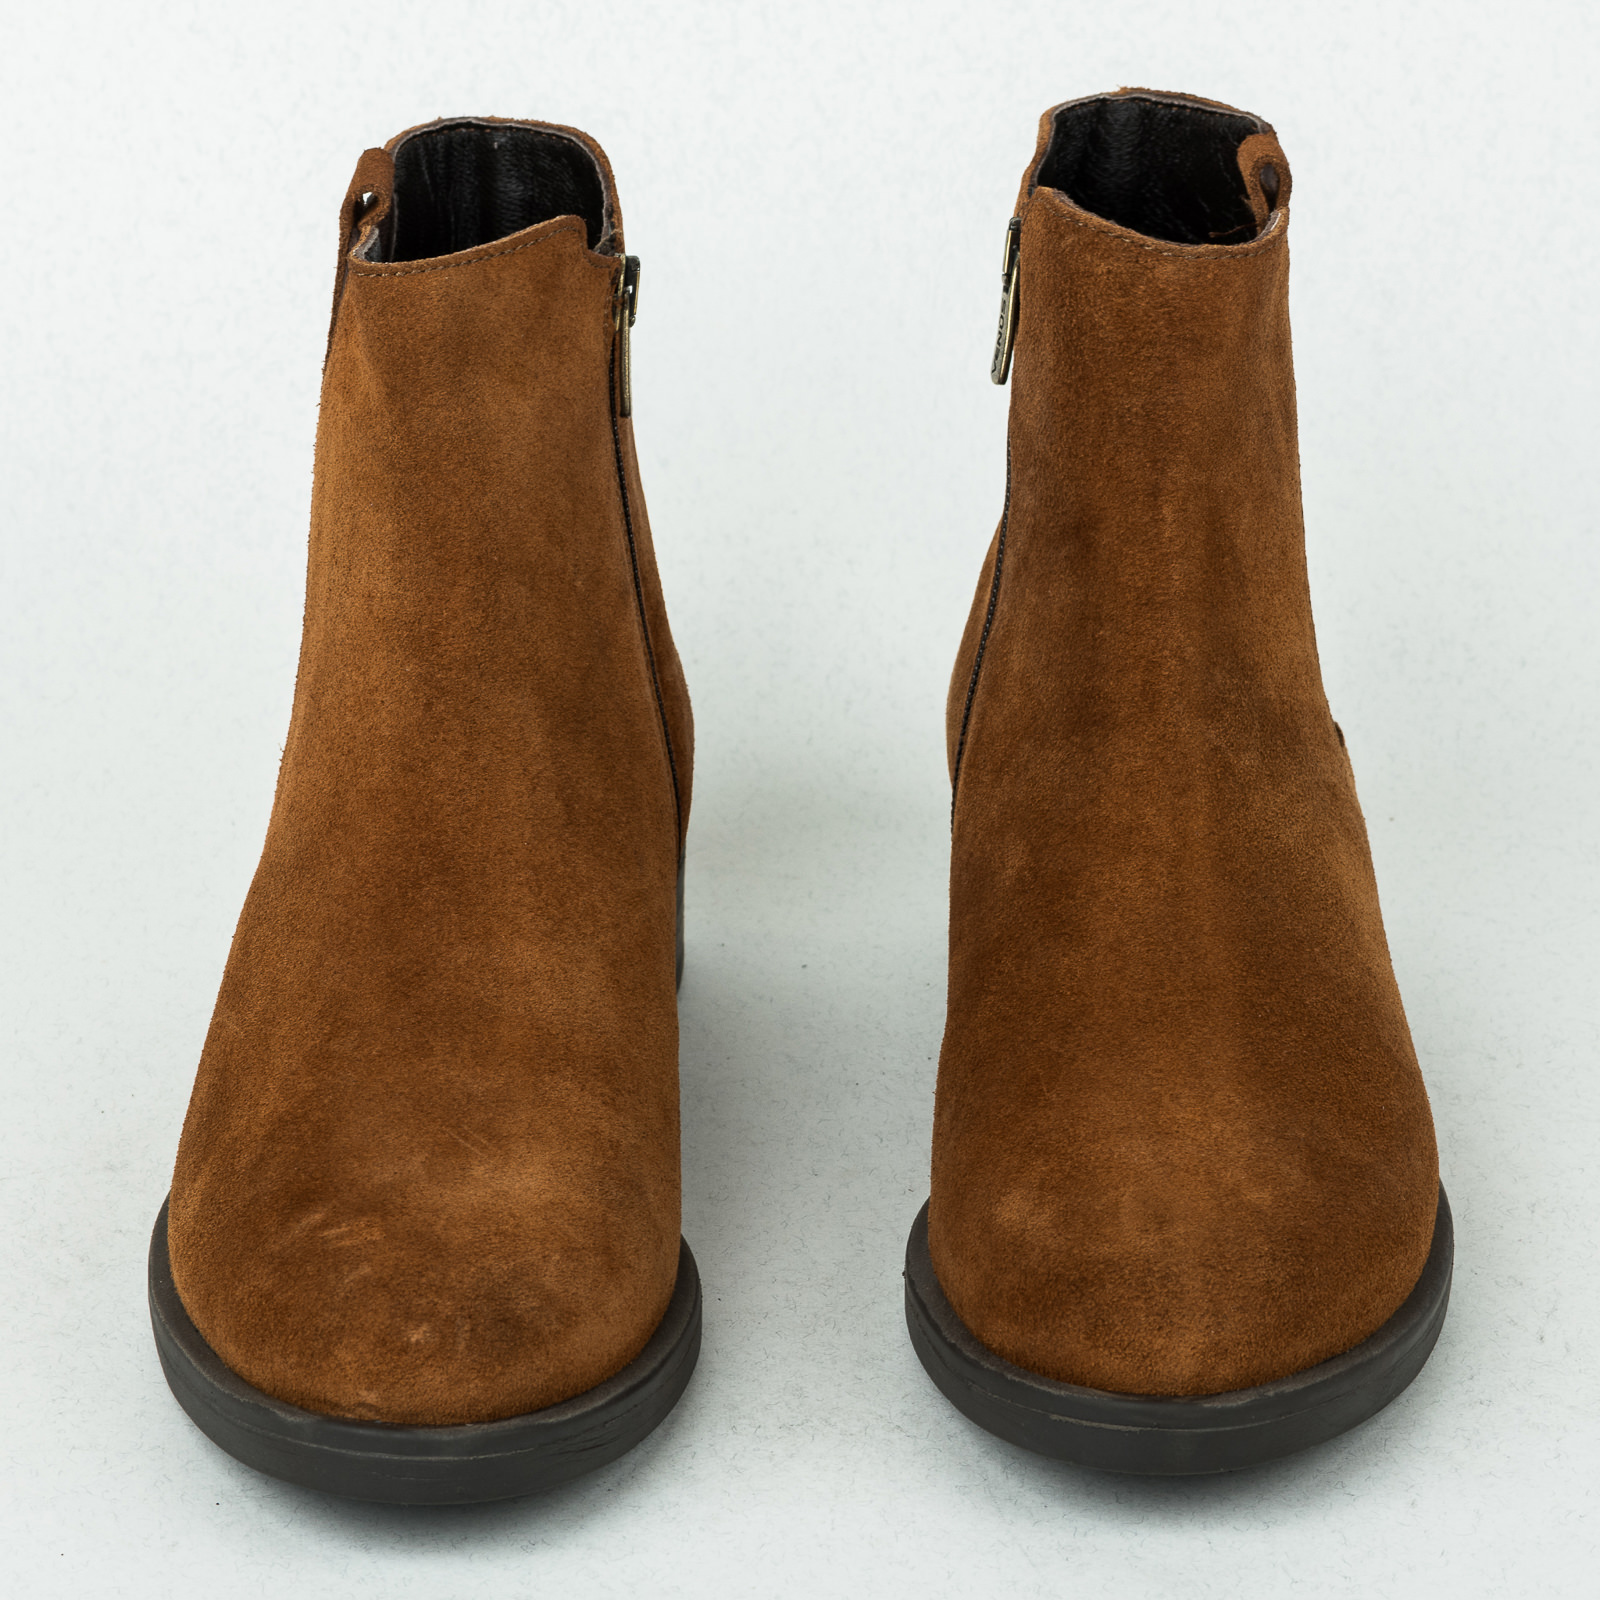 Leather ankle boots B312 - CAMEL